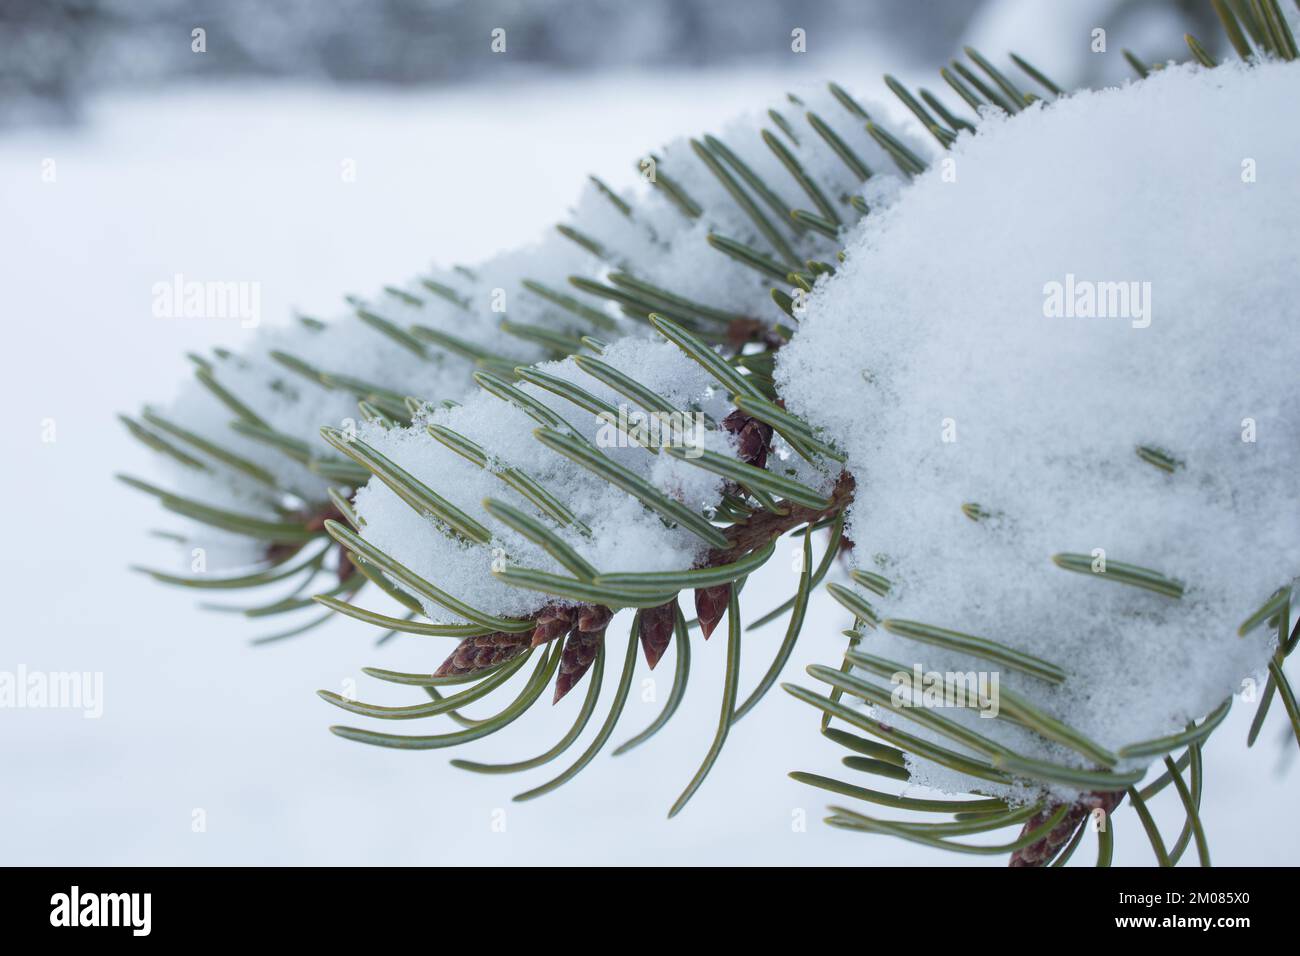 A snow frosted Rocky Mountain Douglas fir tree branch, Pseudotsuga menziesii var. glauca, in Troy, Montana.   Kingdom: Plantae Clade: Tracheophytes Cl Stock Photo